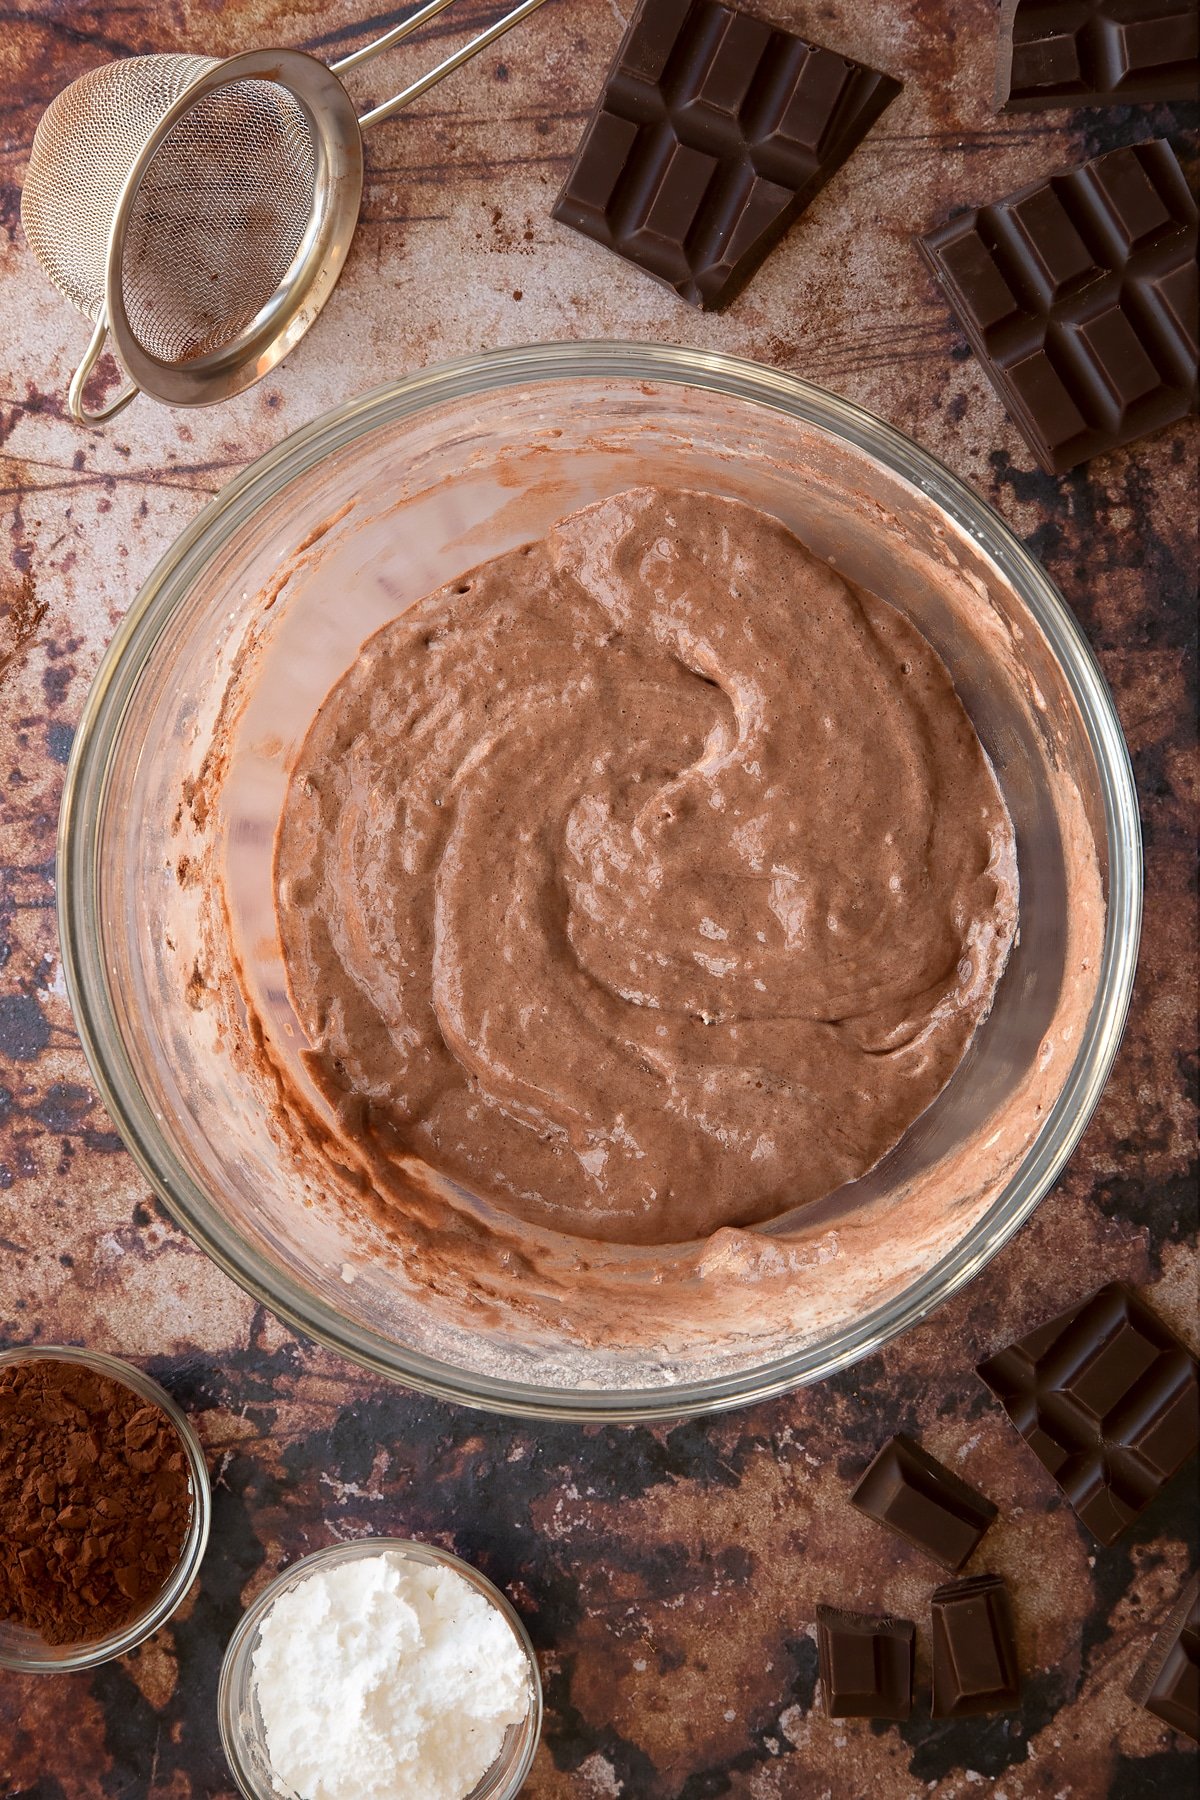 Chocolate sponge batter in a glass mixing bowl. Ingredients for the caterpillar cake recipe surround the bowl.